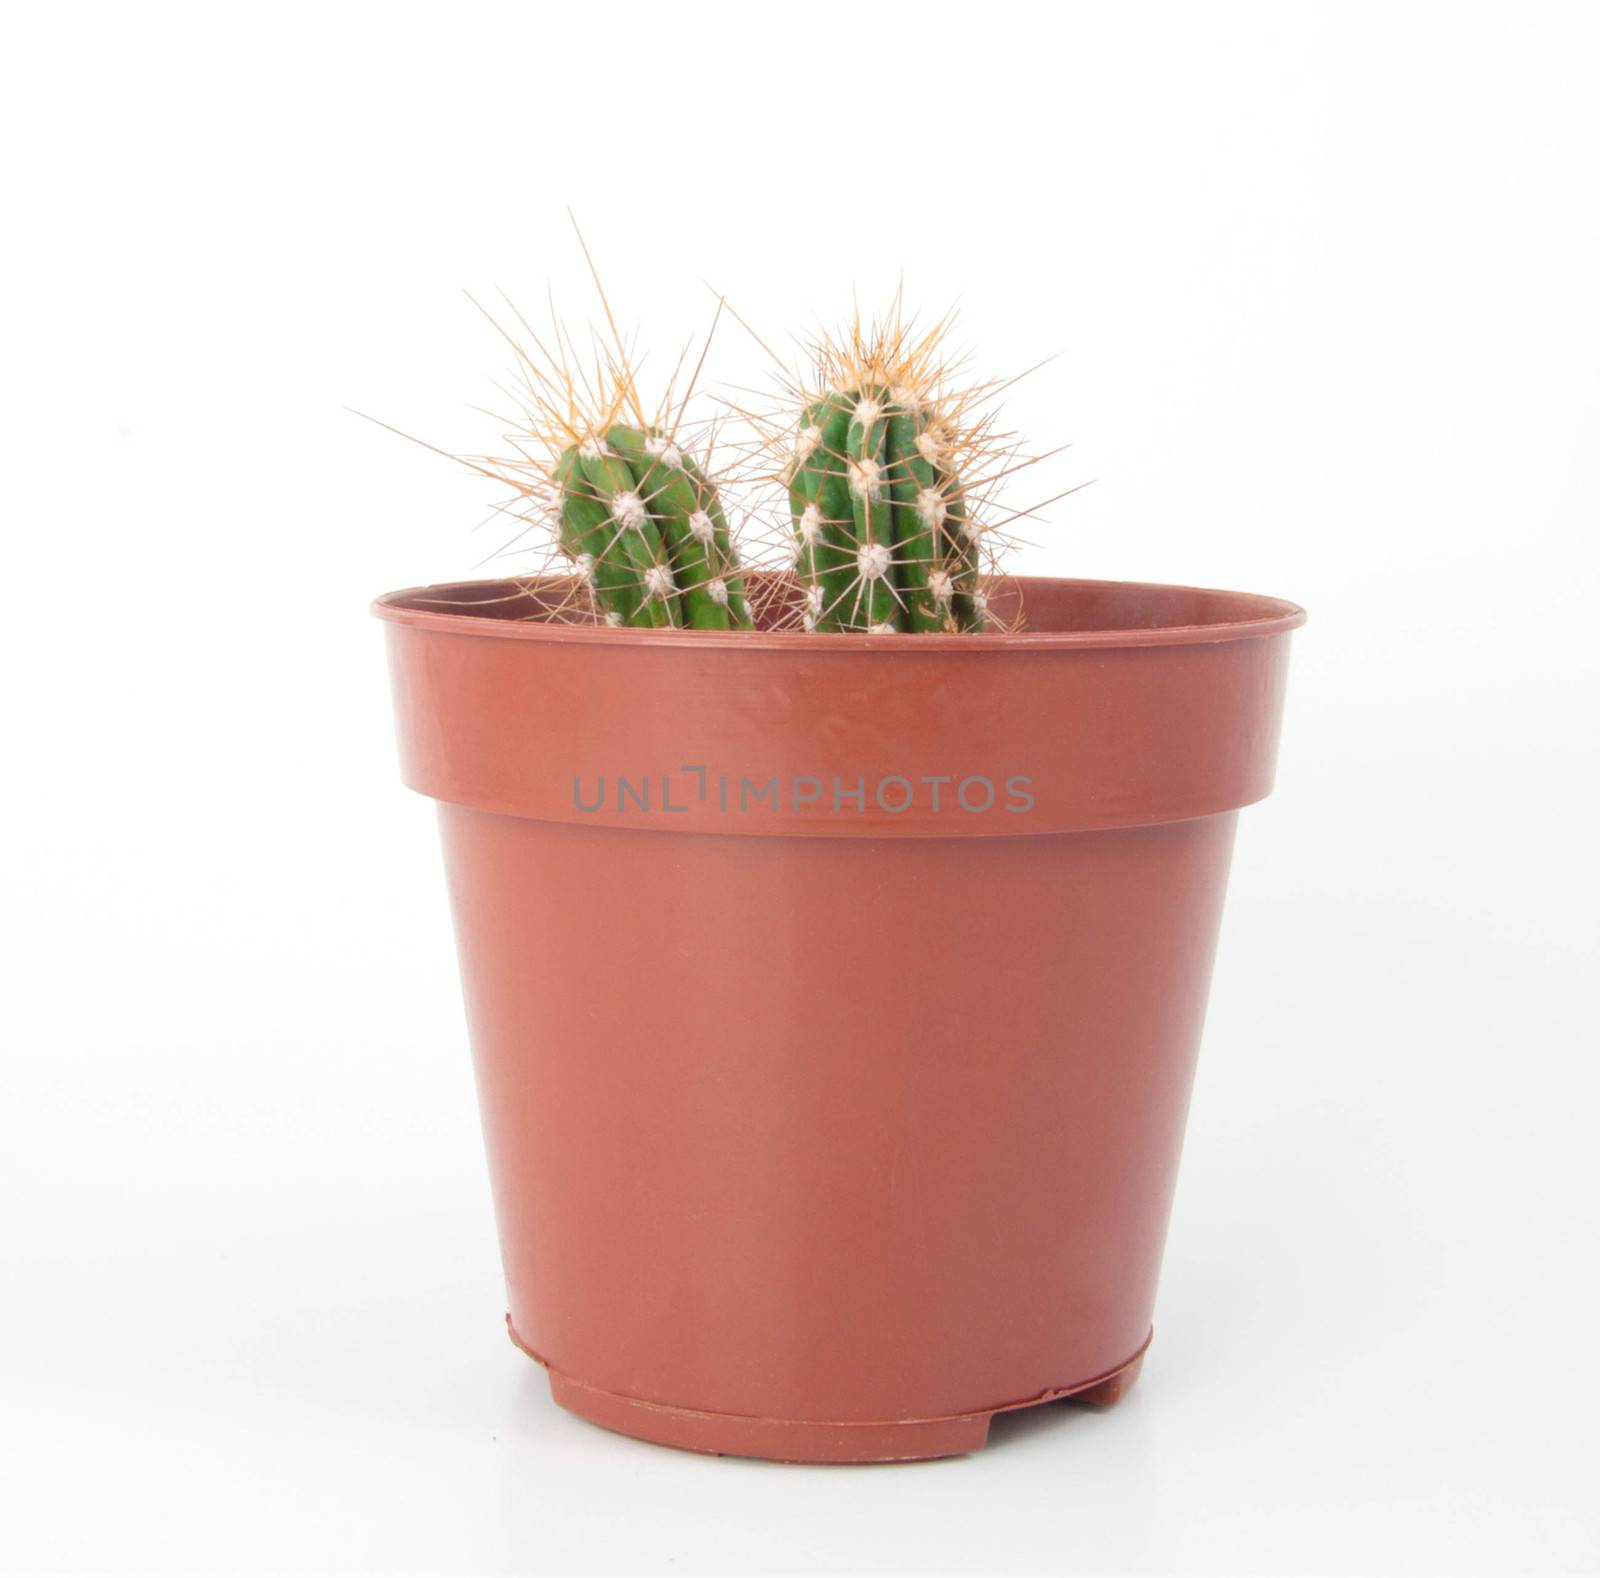 Two Cactus with Thorns in a Pot by shutswis